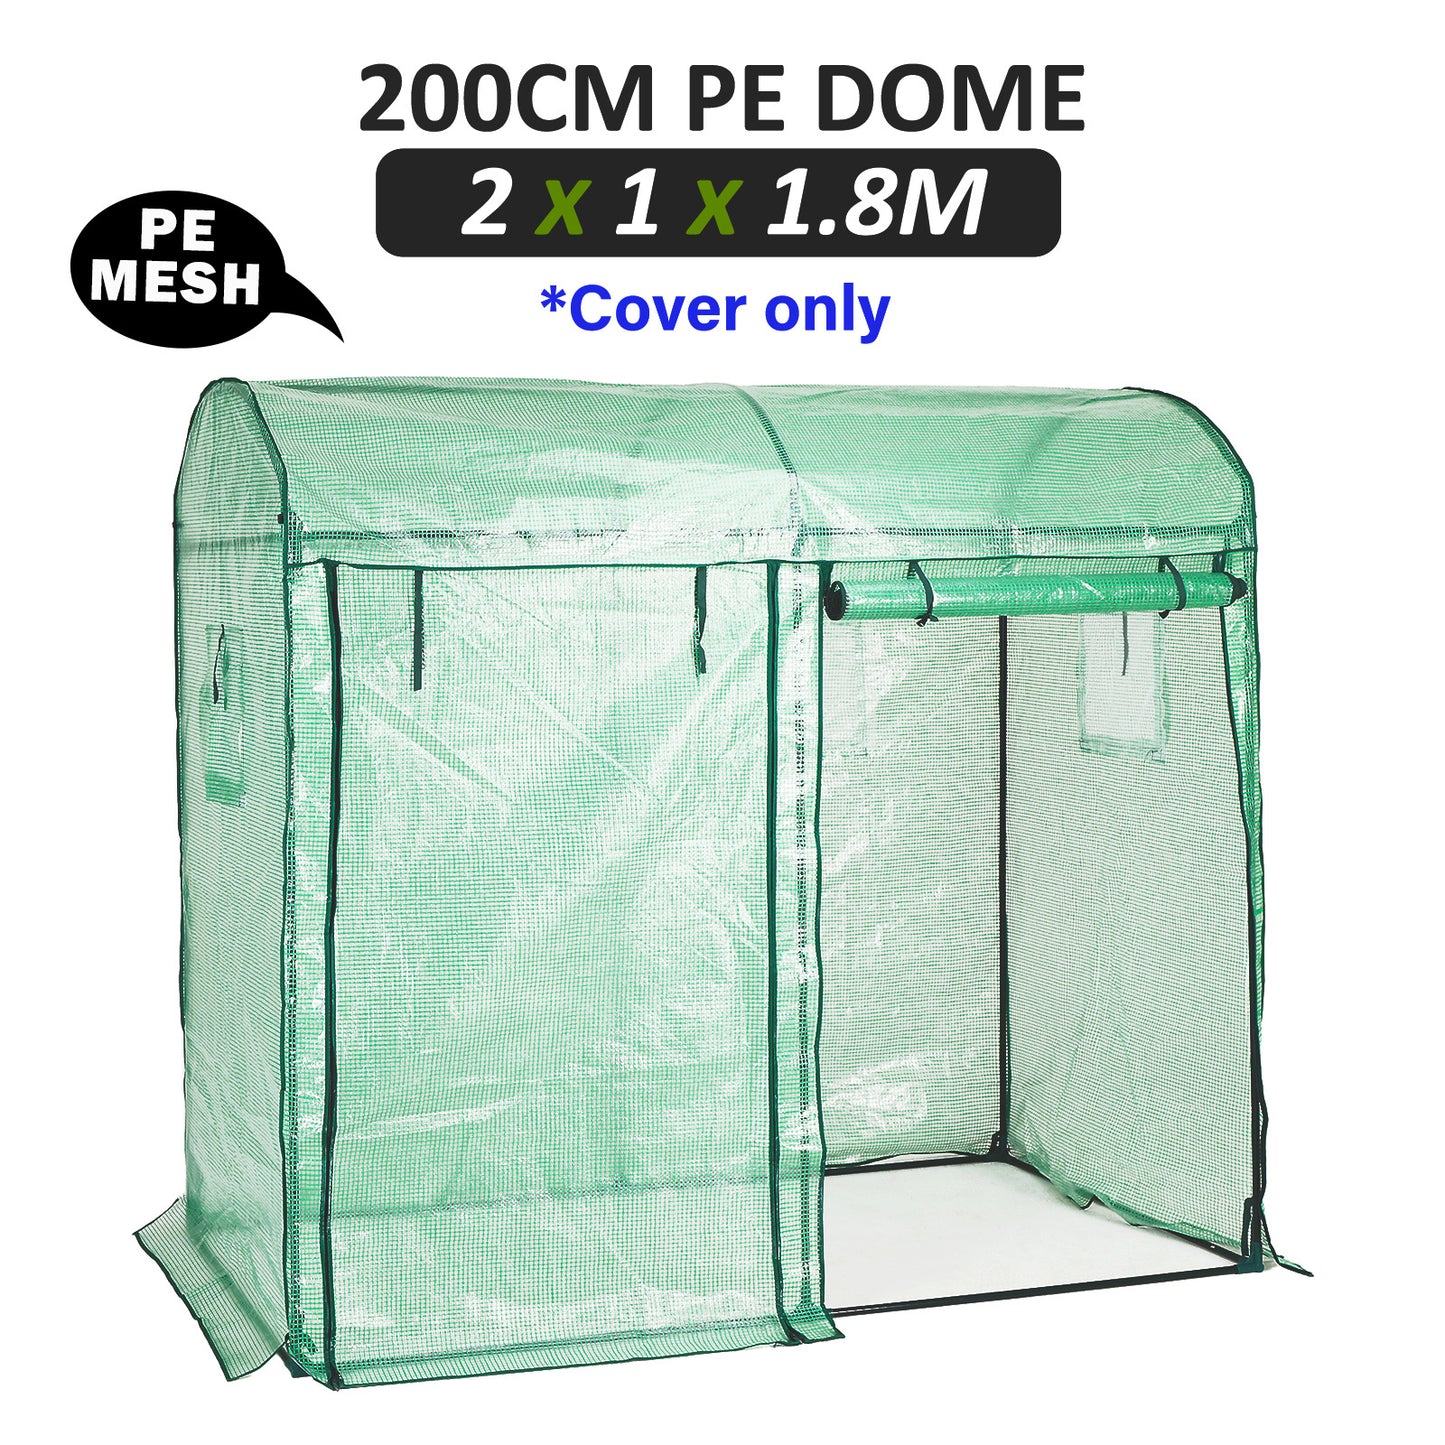 Home Ready Dome 200cm Garden Greenhouse Shed PE Cover Only - image1